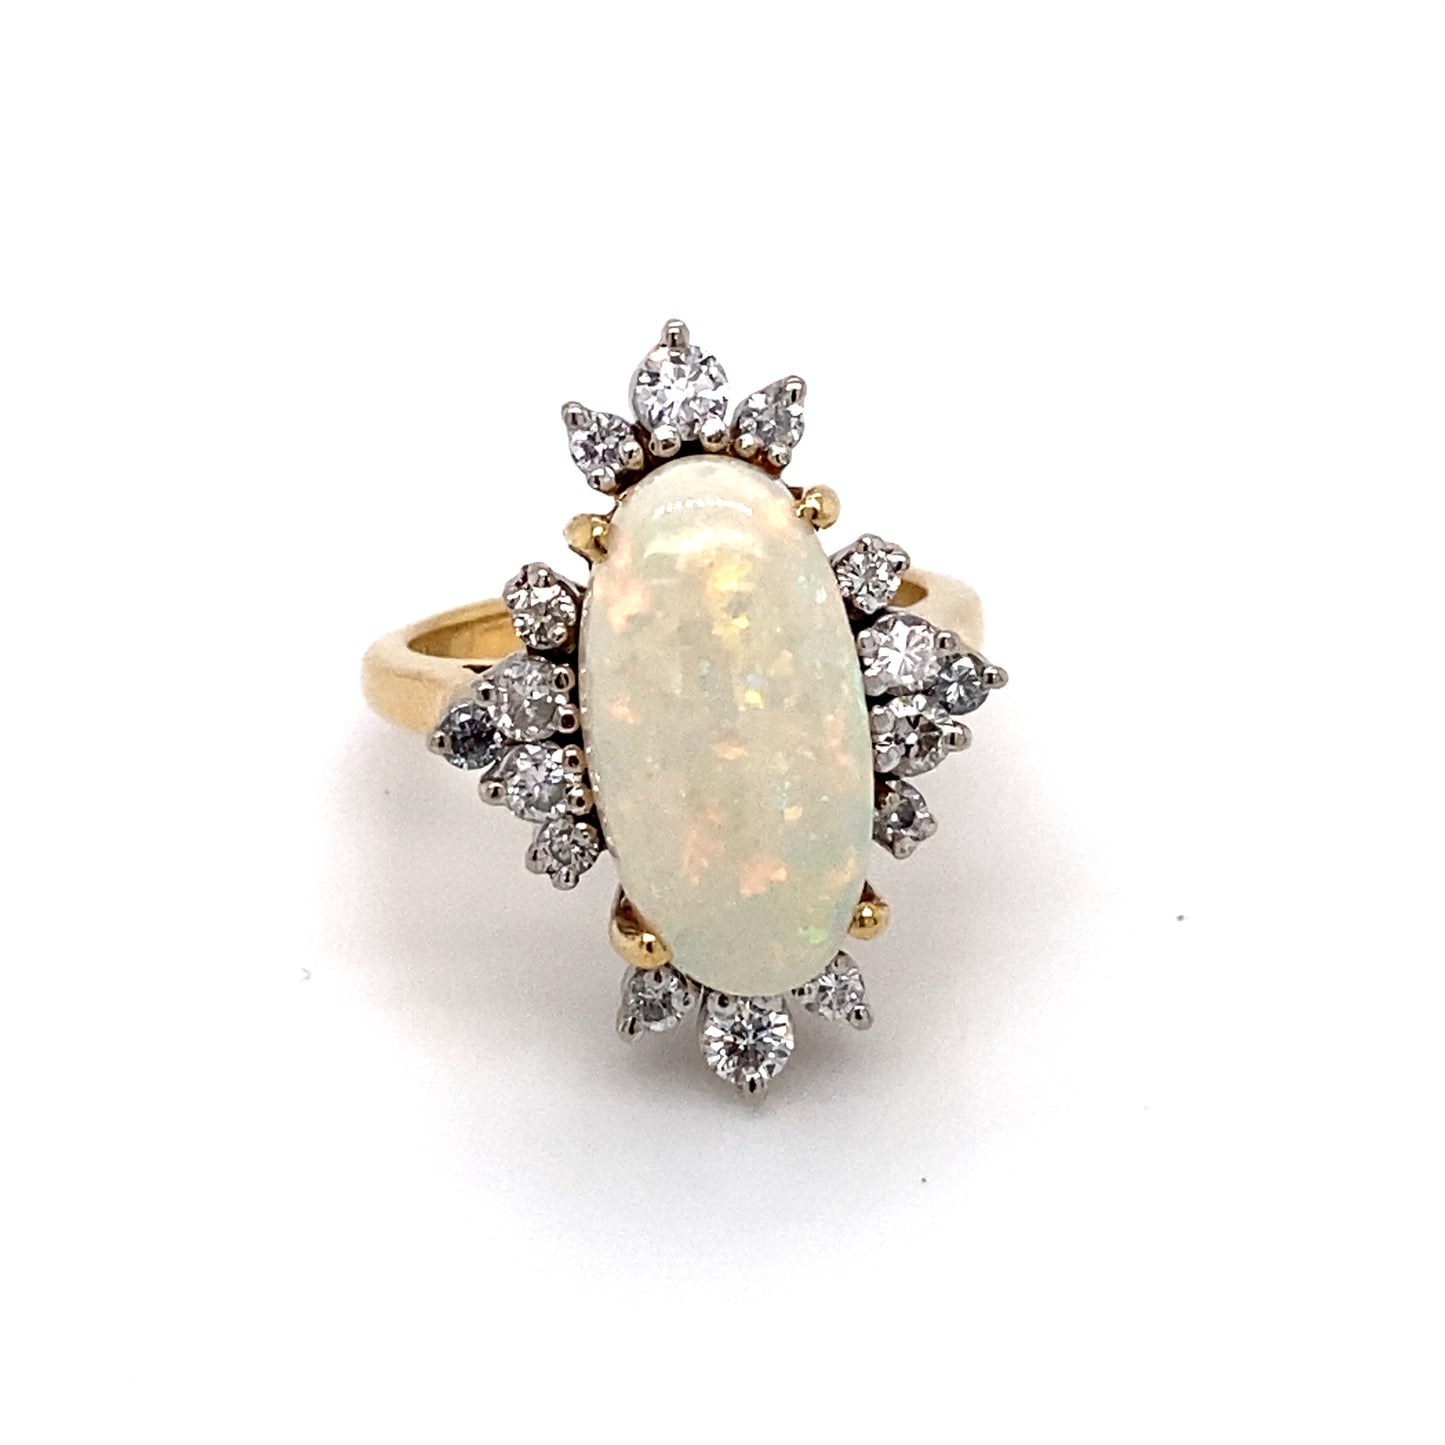 Circa 1950 3.0 Carat Opal and Diamond Ring in 18K Gold